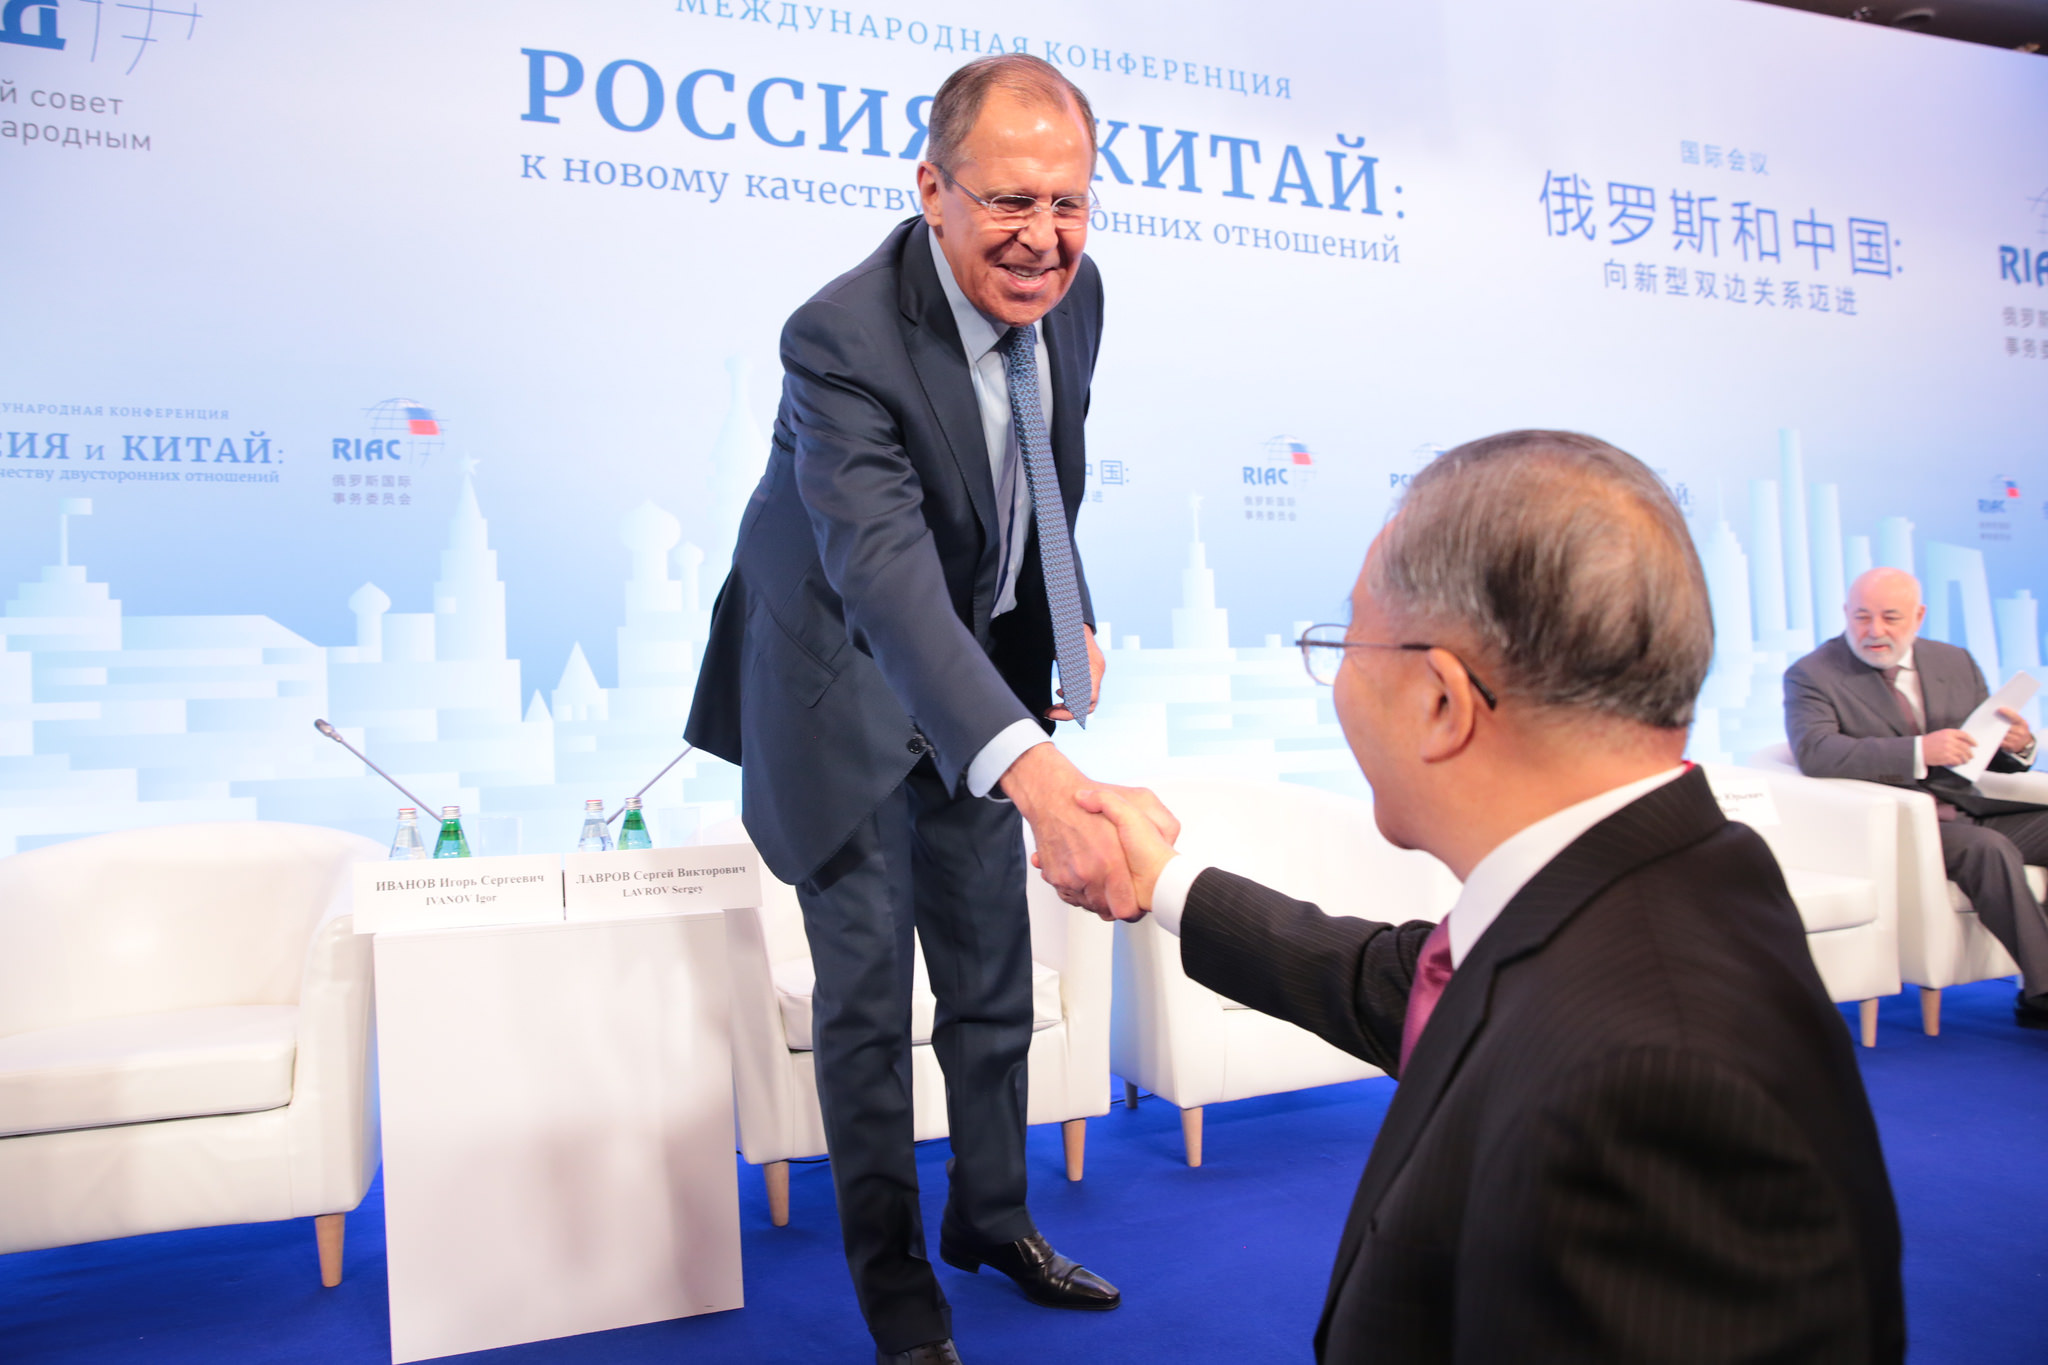 Russian Foreign Minister Sergei Lavrov (L) shakes hands with Chinese diplomat Dai Bingguo (R).